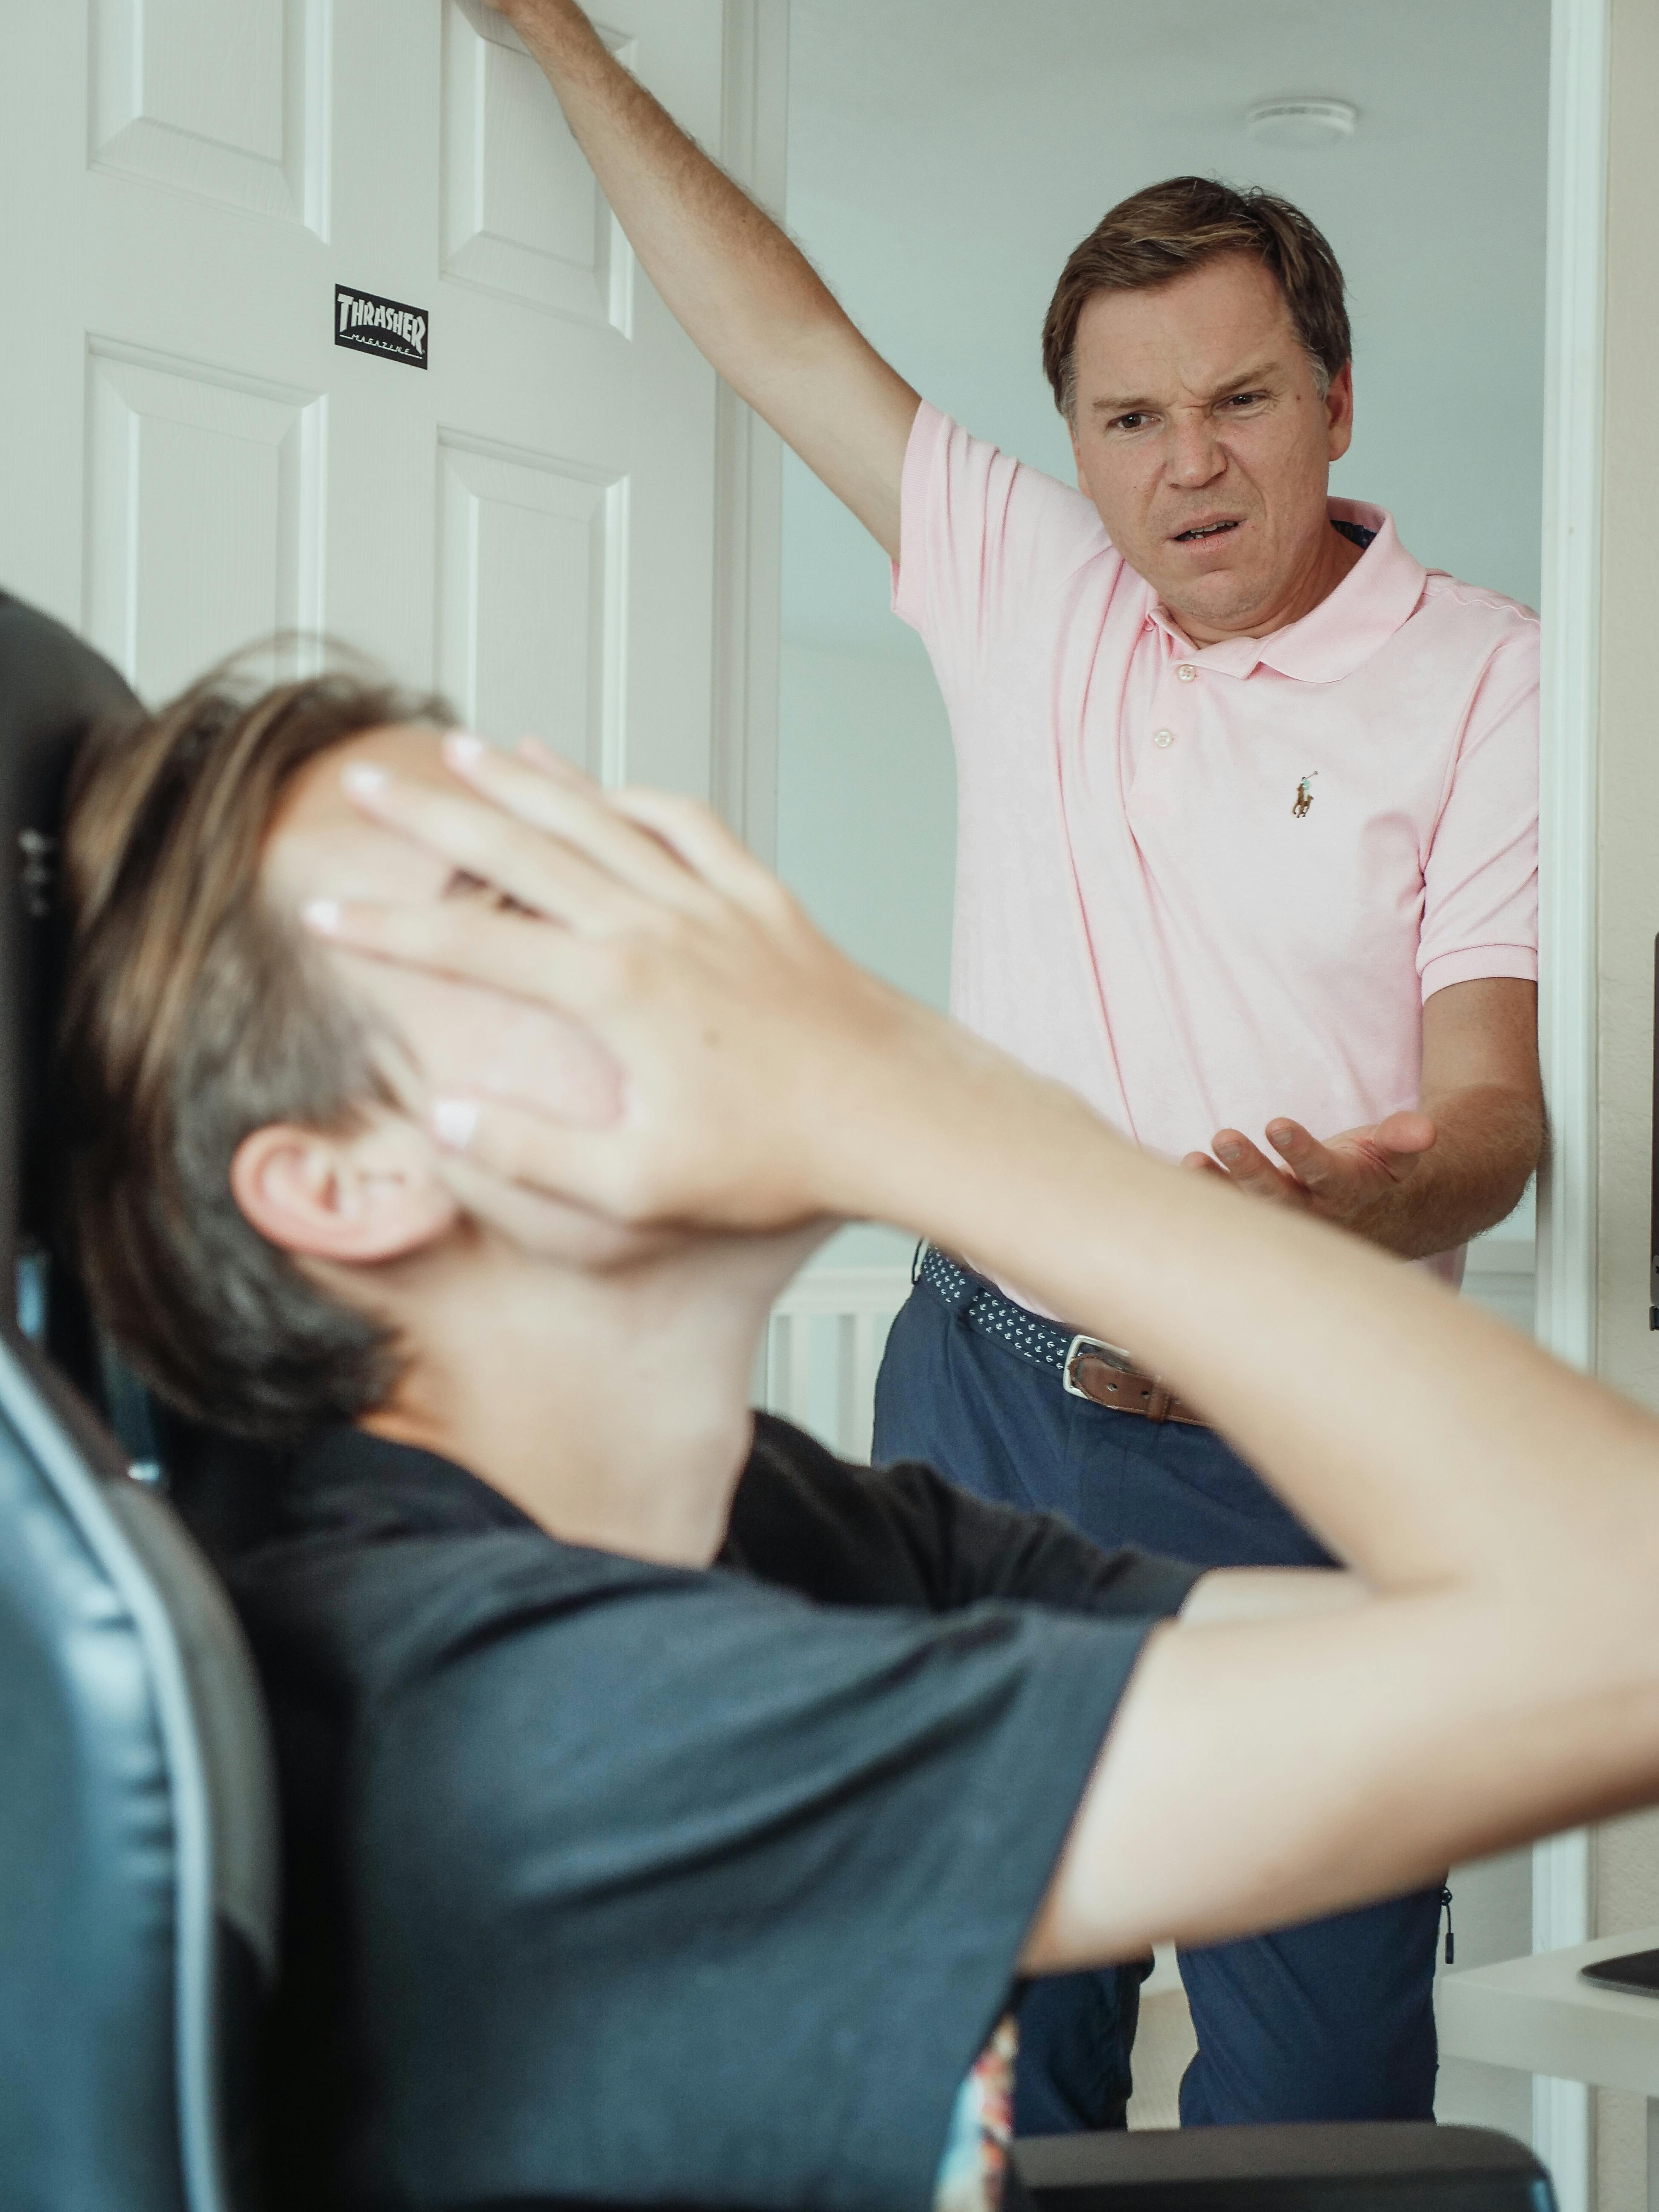 An irritated son covering his face while his father is talking to him | Source: Pexels